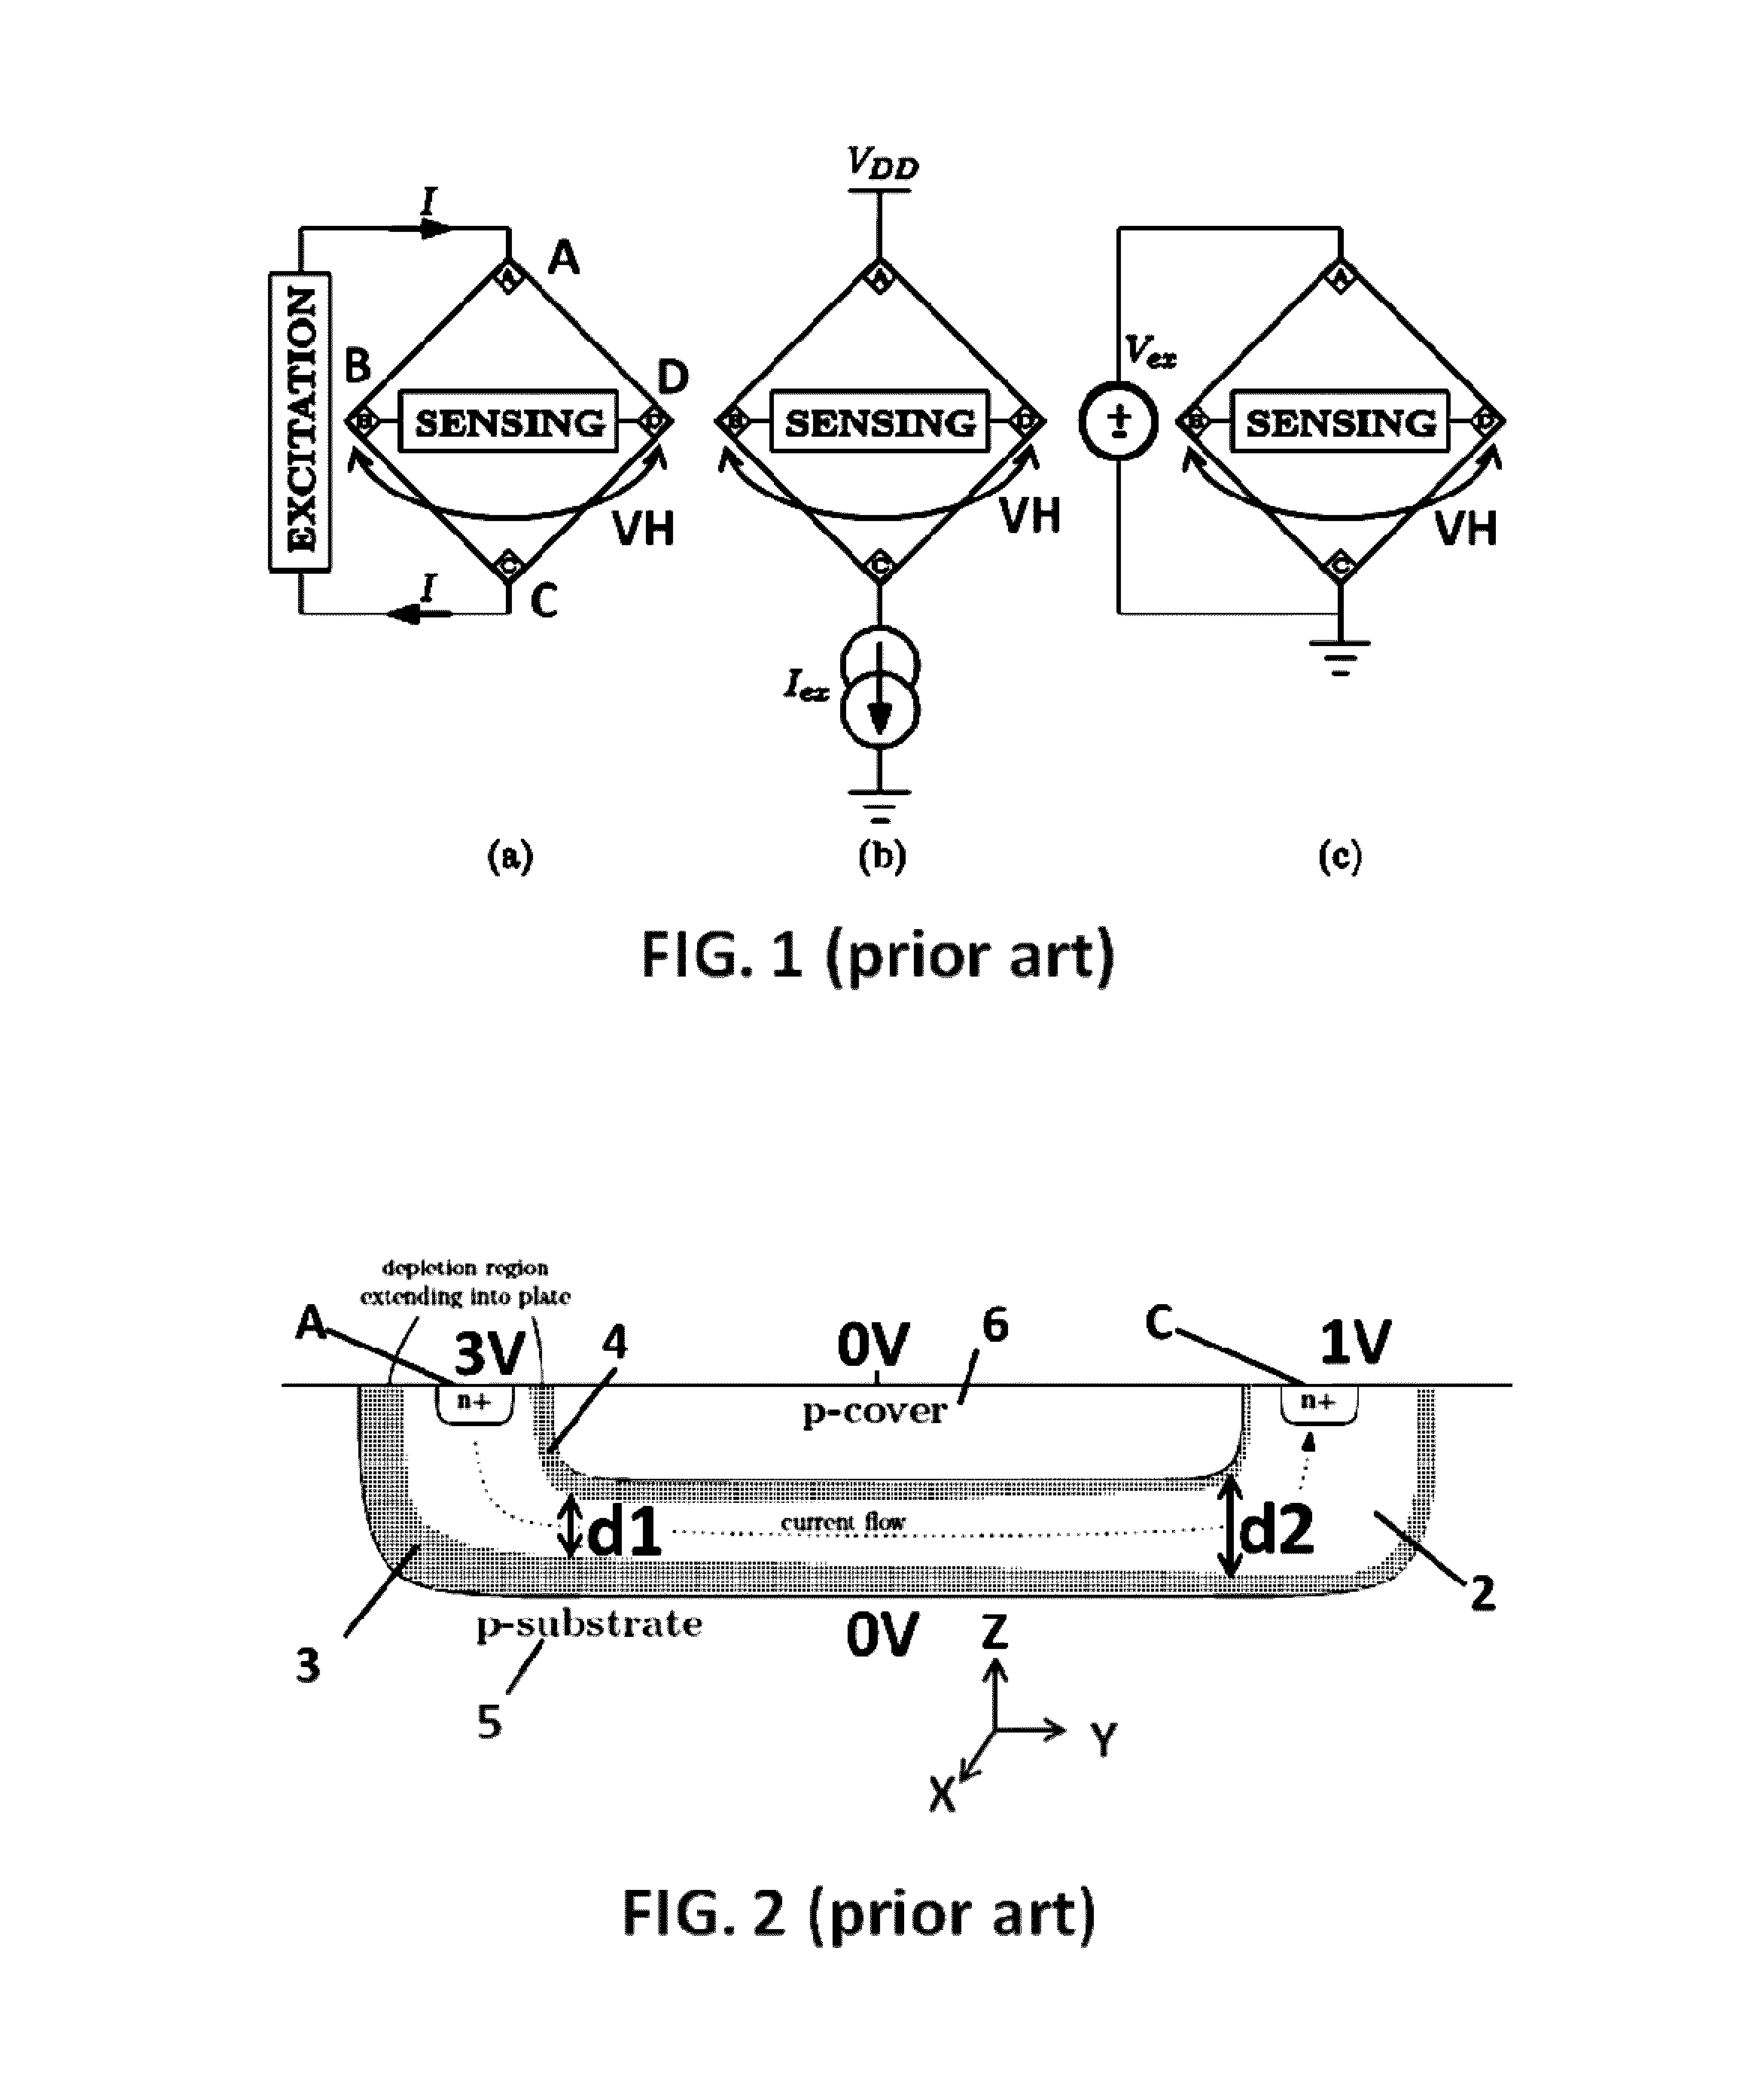 Circuit and method for biasing a plate-shaped sensor element of semiconductor material